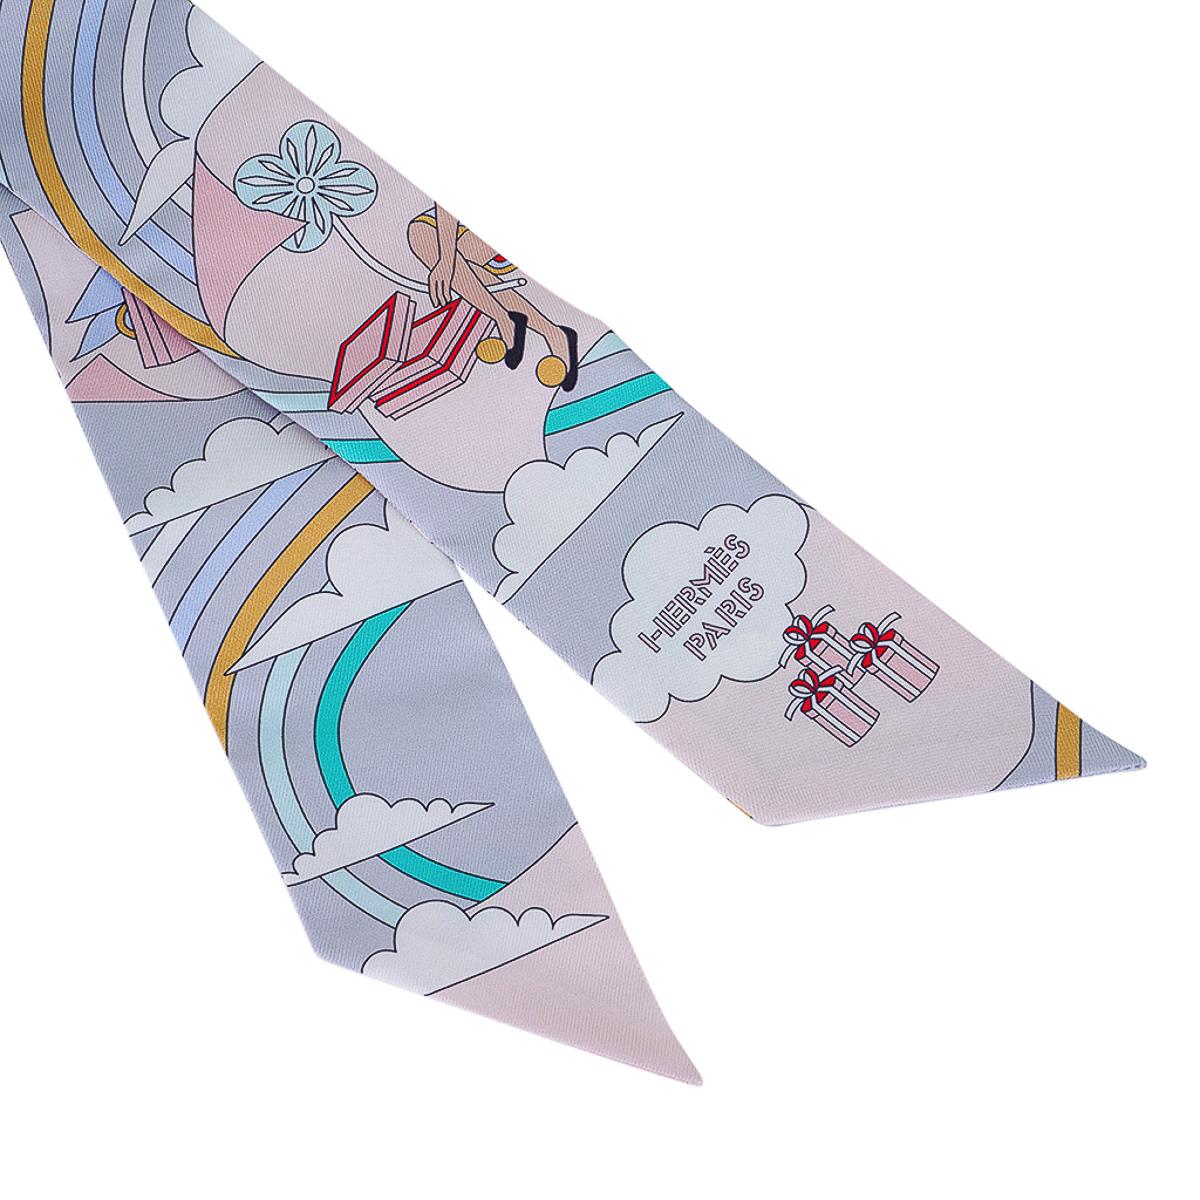 Hermes Twilly Carres Volants Gris Perle / Rose Pale Silk Scarf Set of 2 For Sale 1